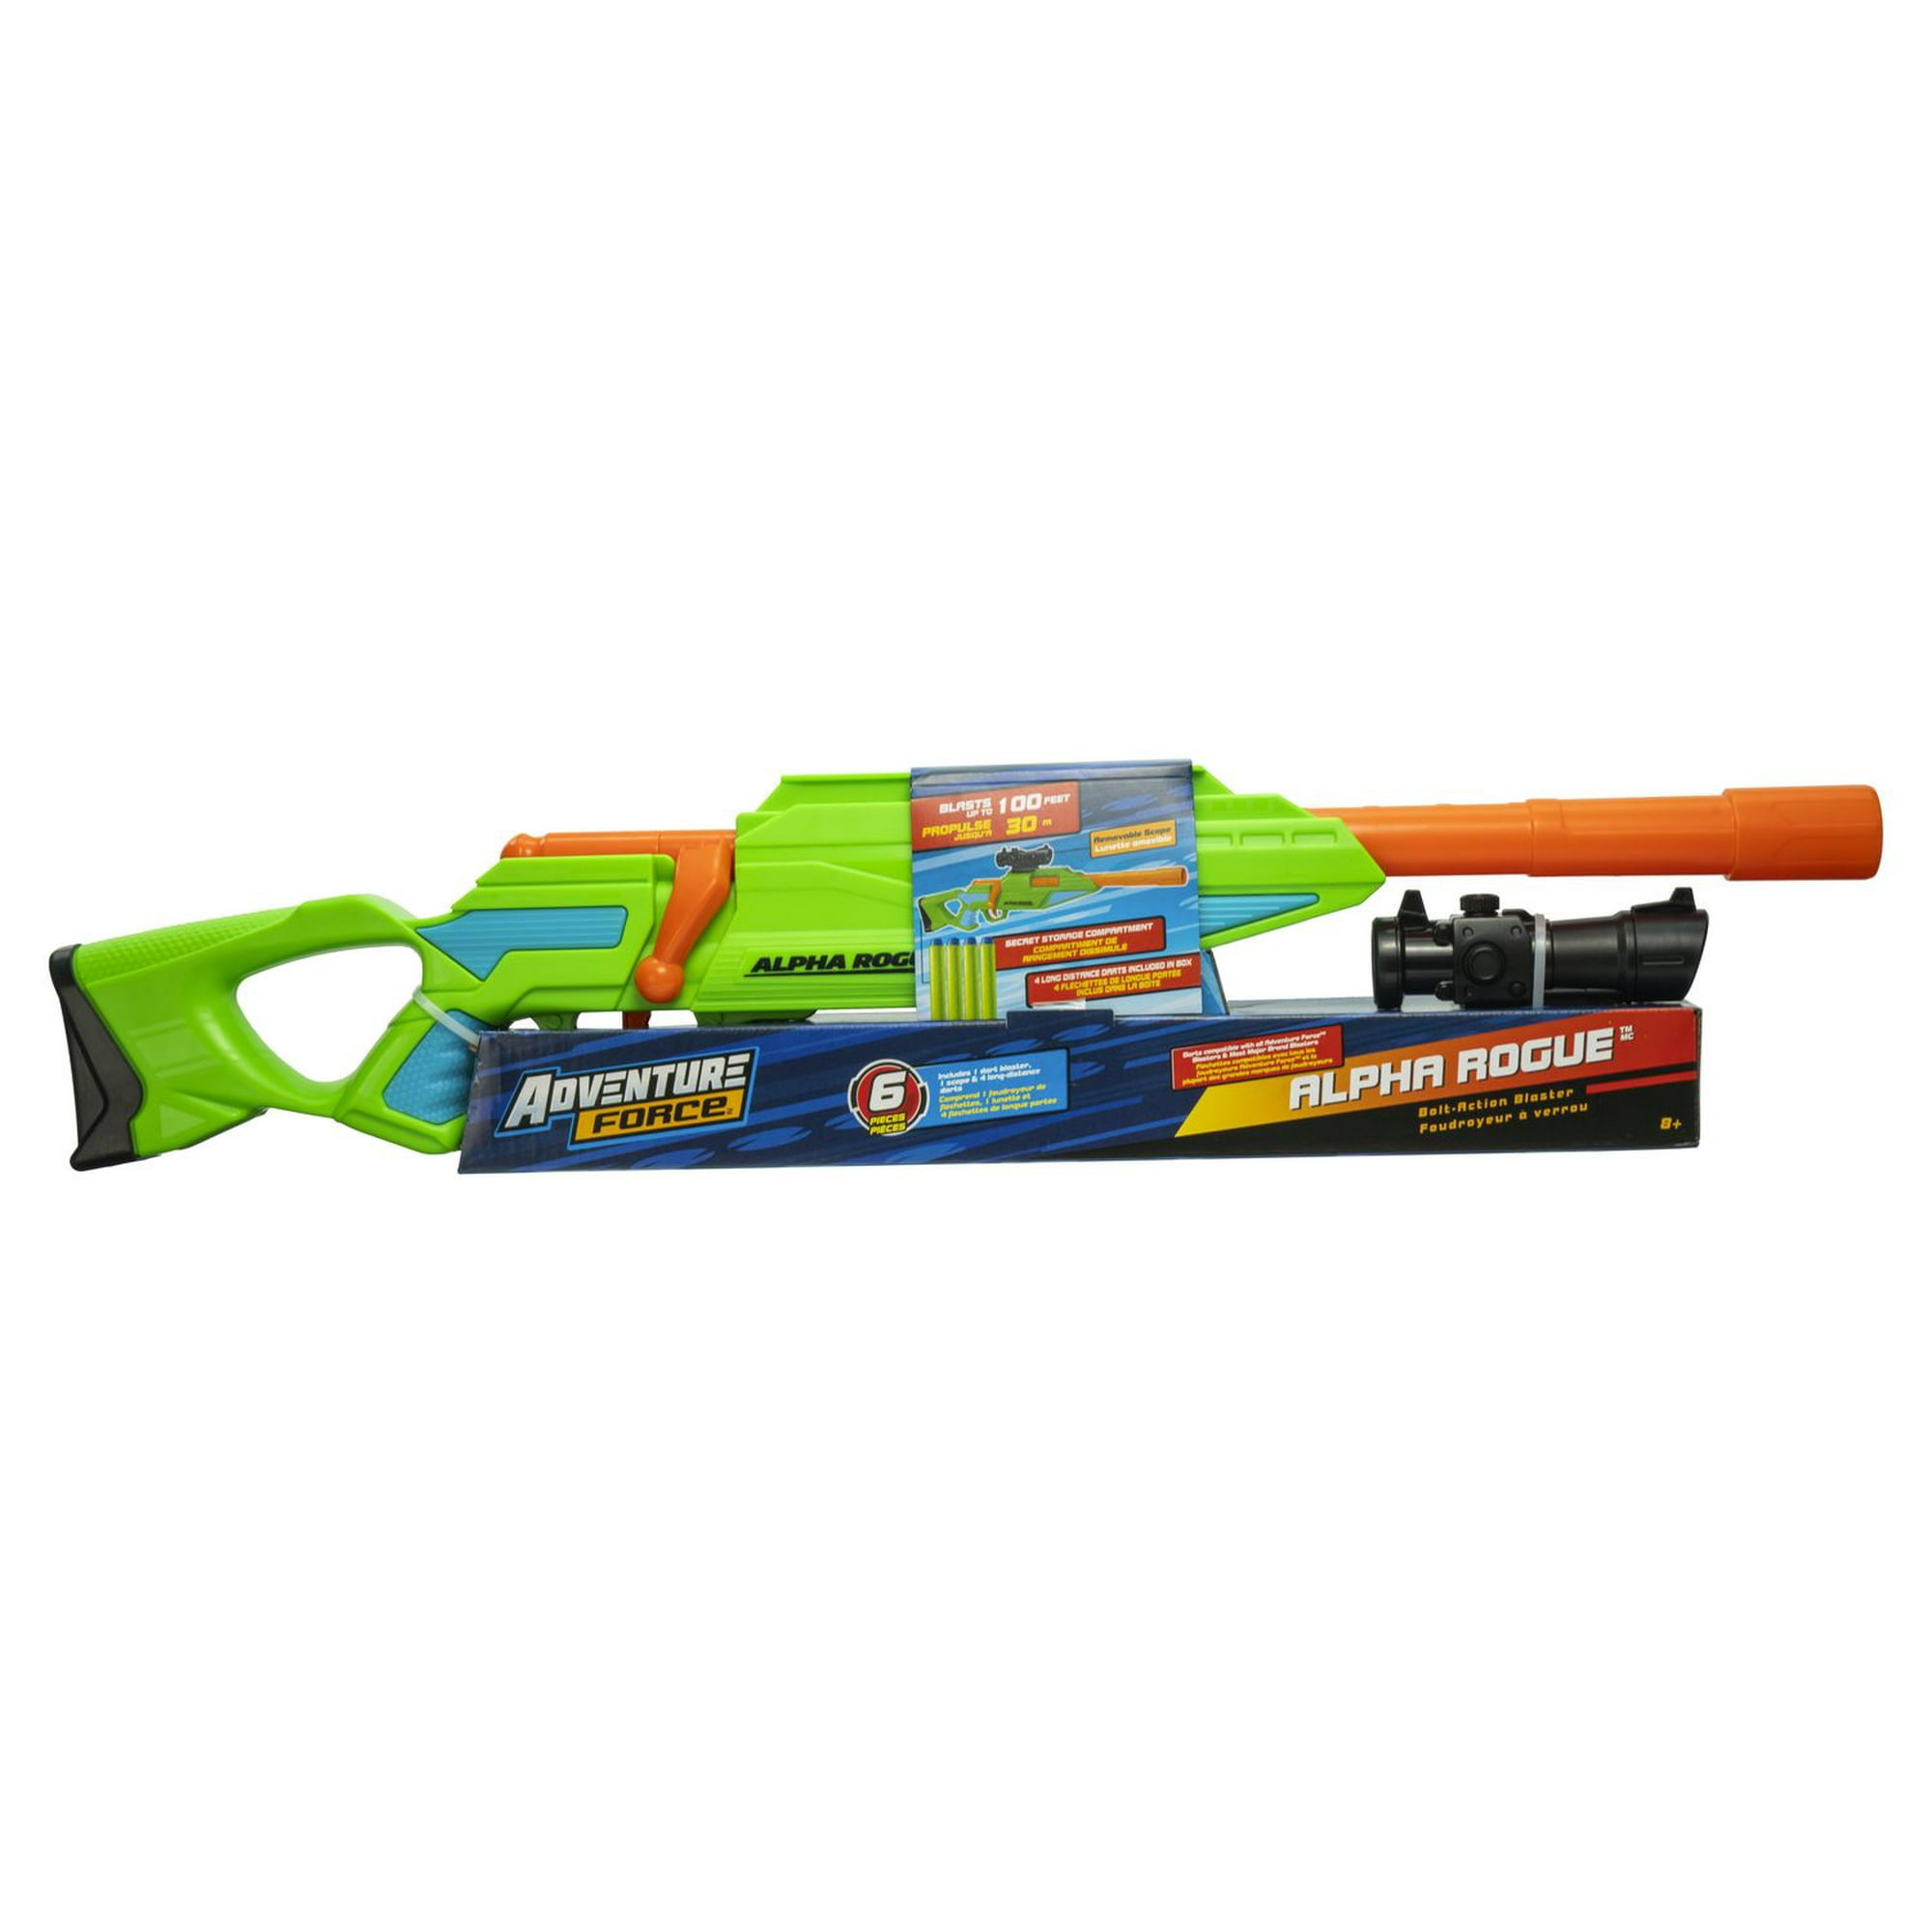 Adventure Force Alpha Rogue, Up to 100FT dart blasting distance 